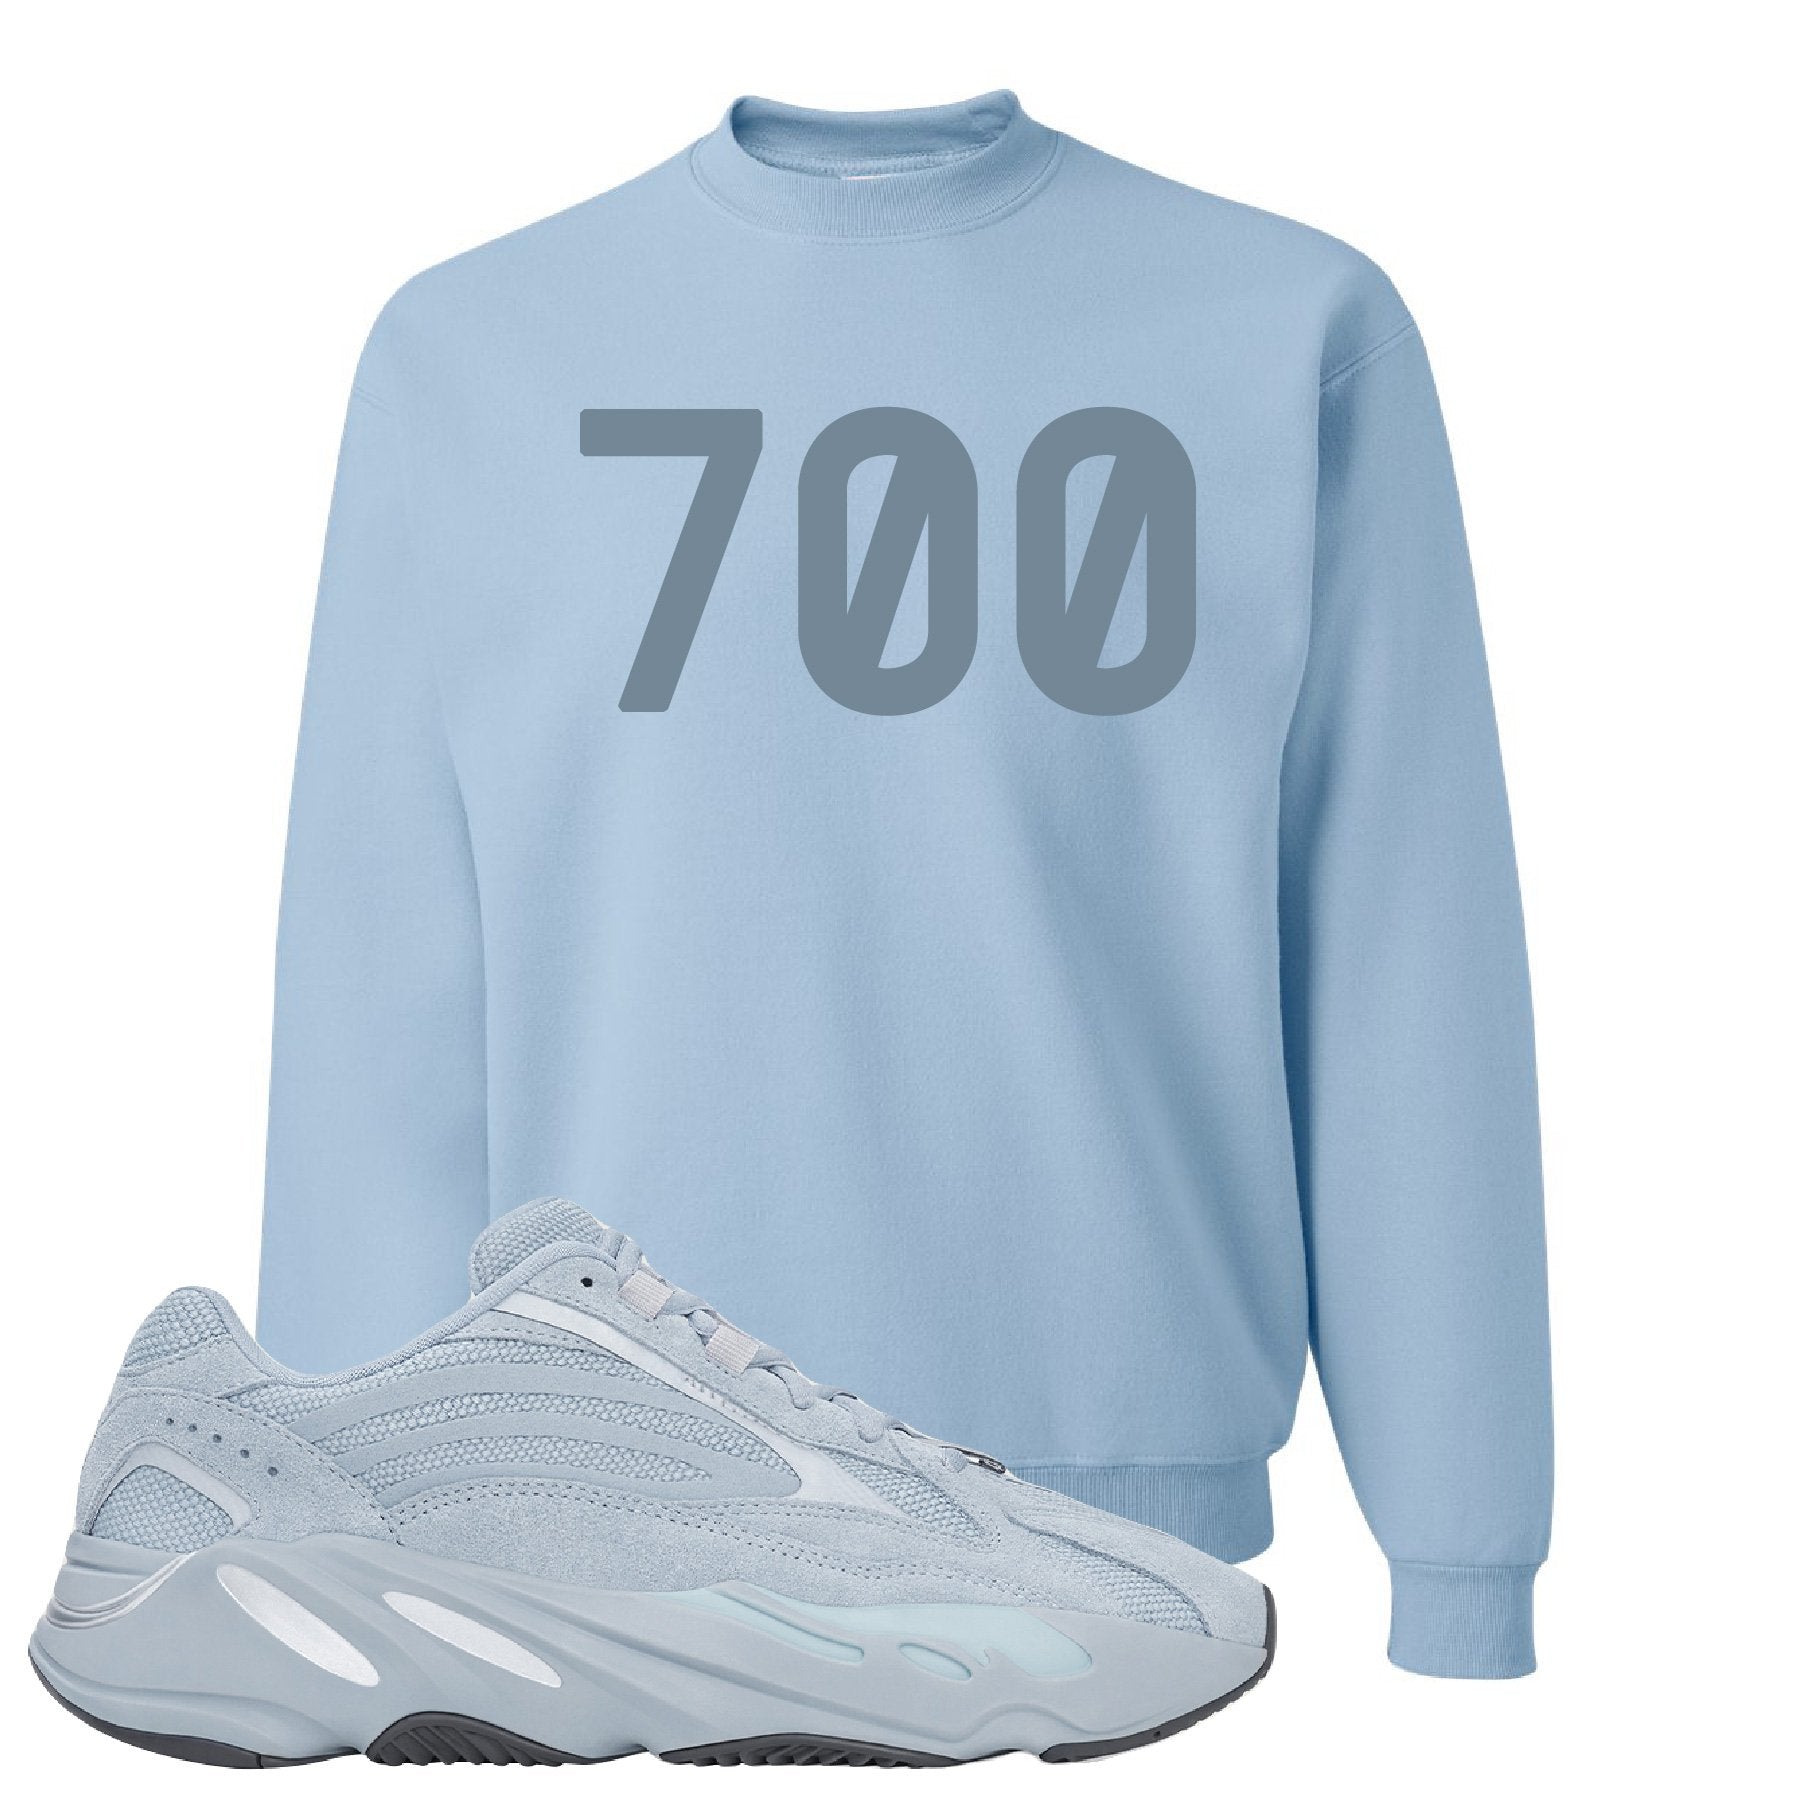 Yeezy Boost 700 V2 Hospital Blue 700 Sneaker Matching Light Blue Pullover Hoodie